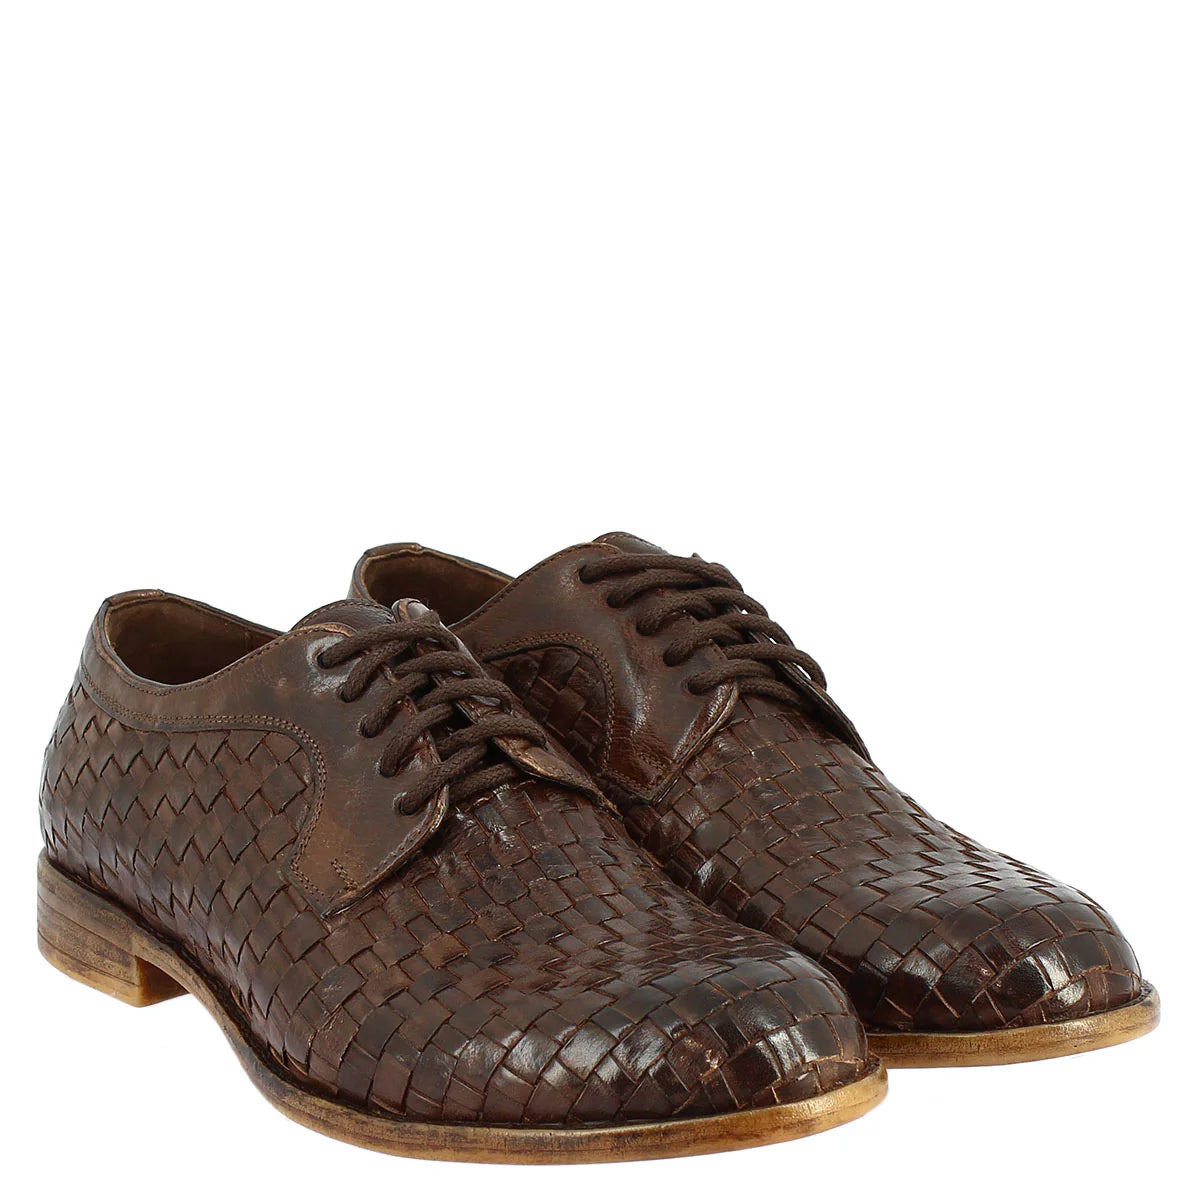 Dark Brown Woven Leather Shoes